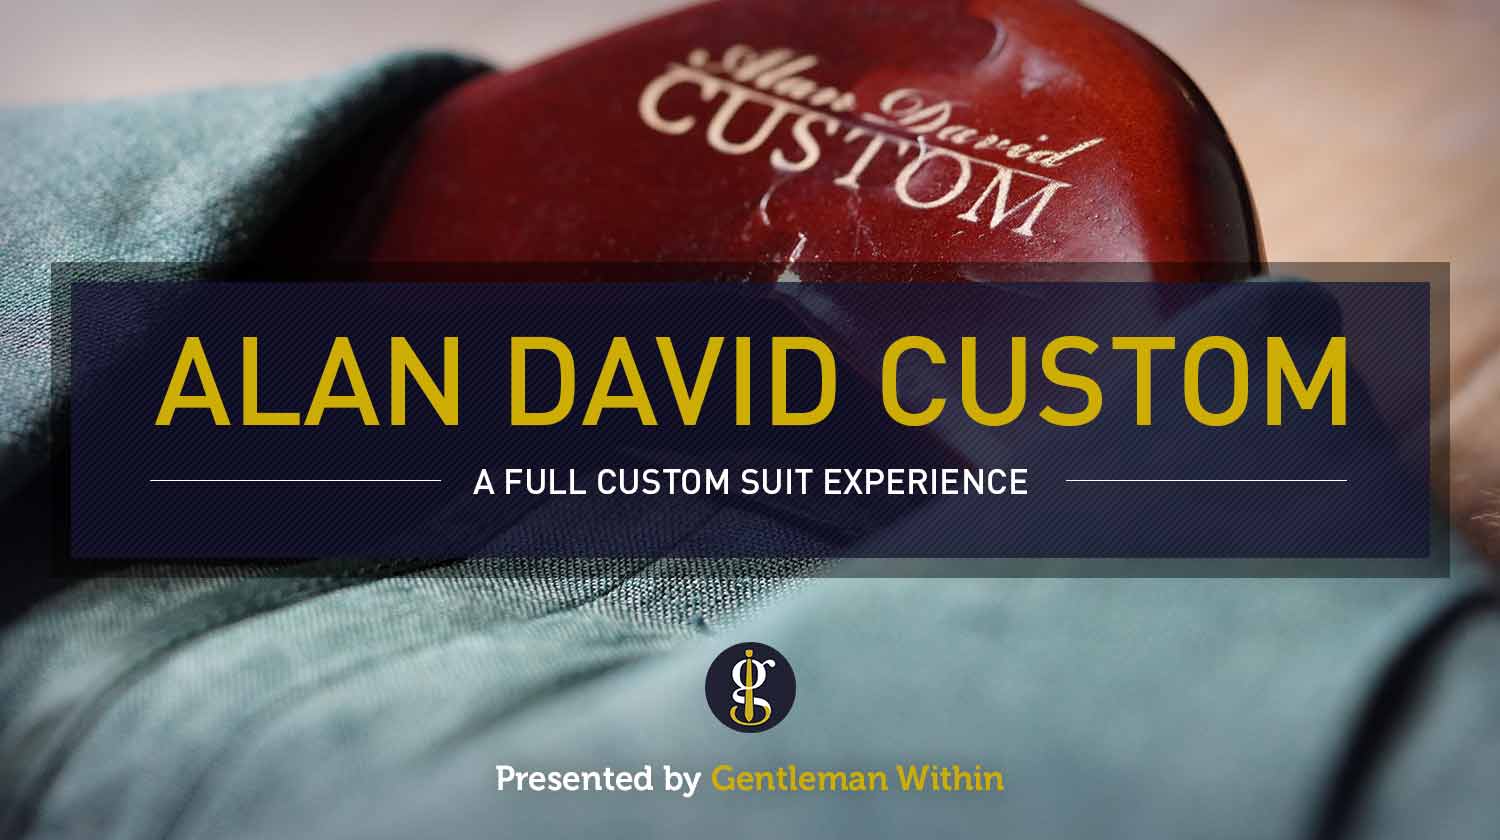 Review: My Alan David Custom Suit Experience | GENTLEMAN WITHIN